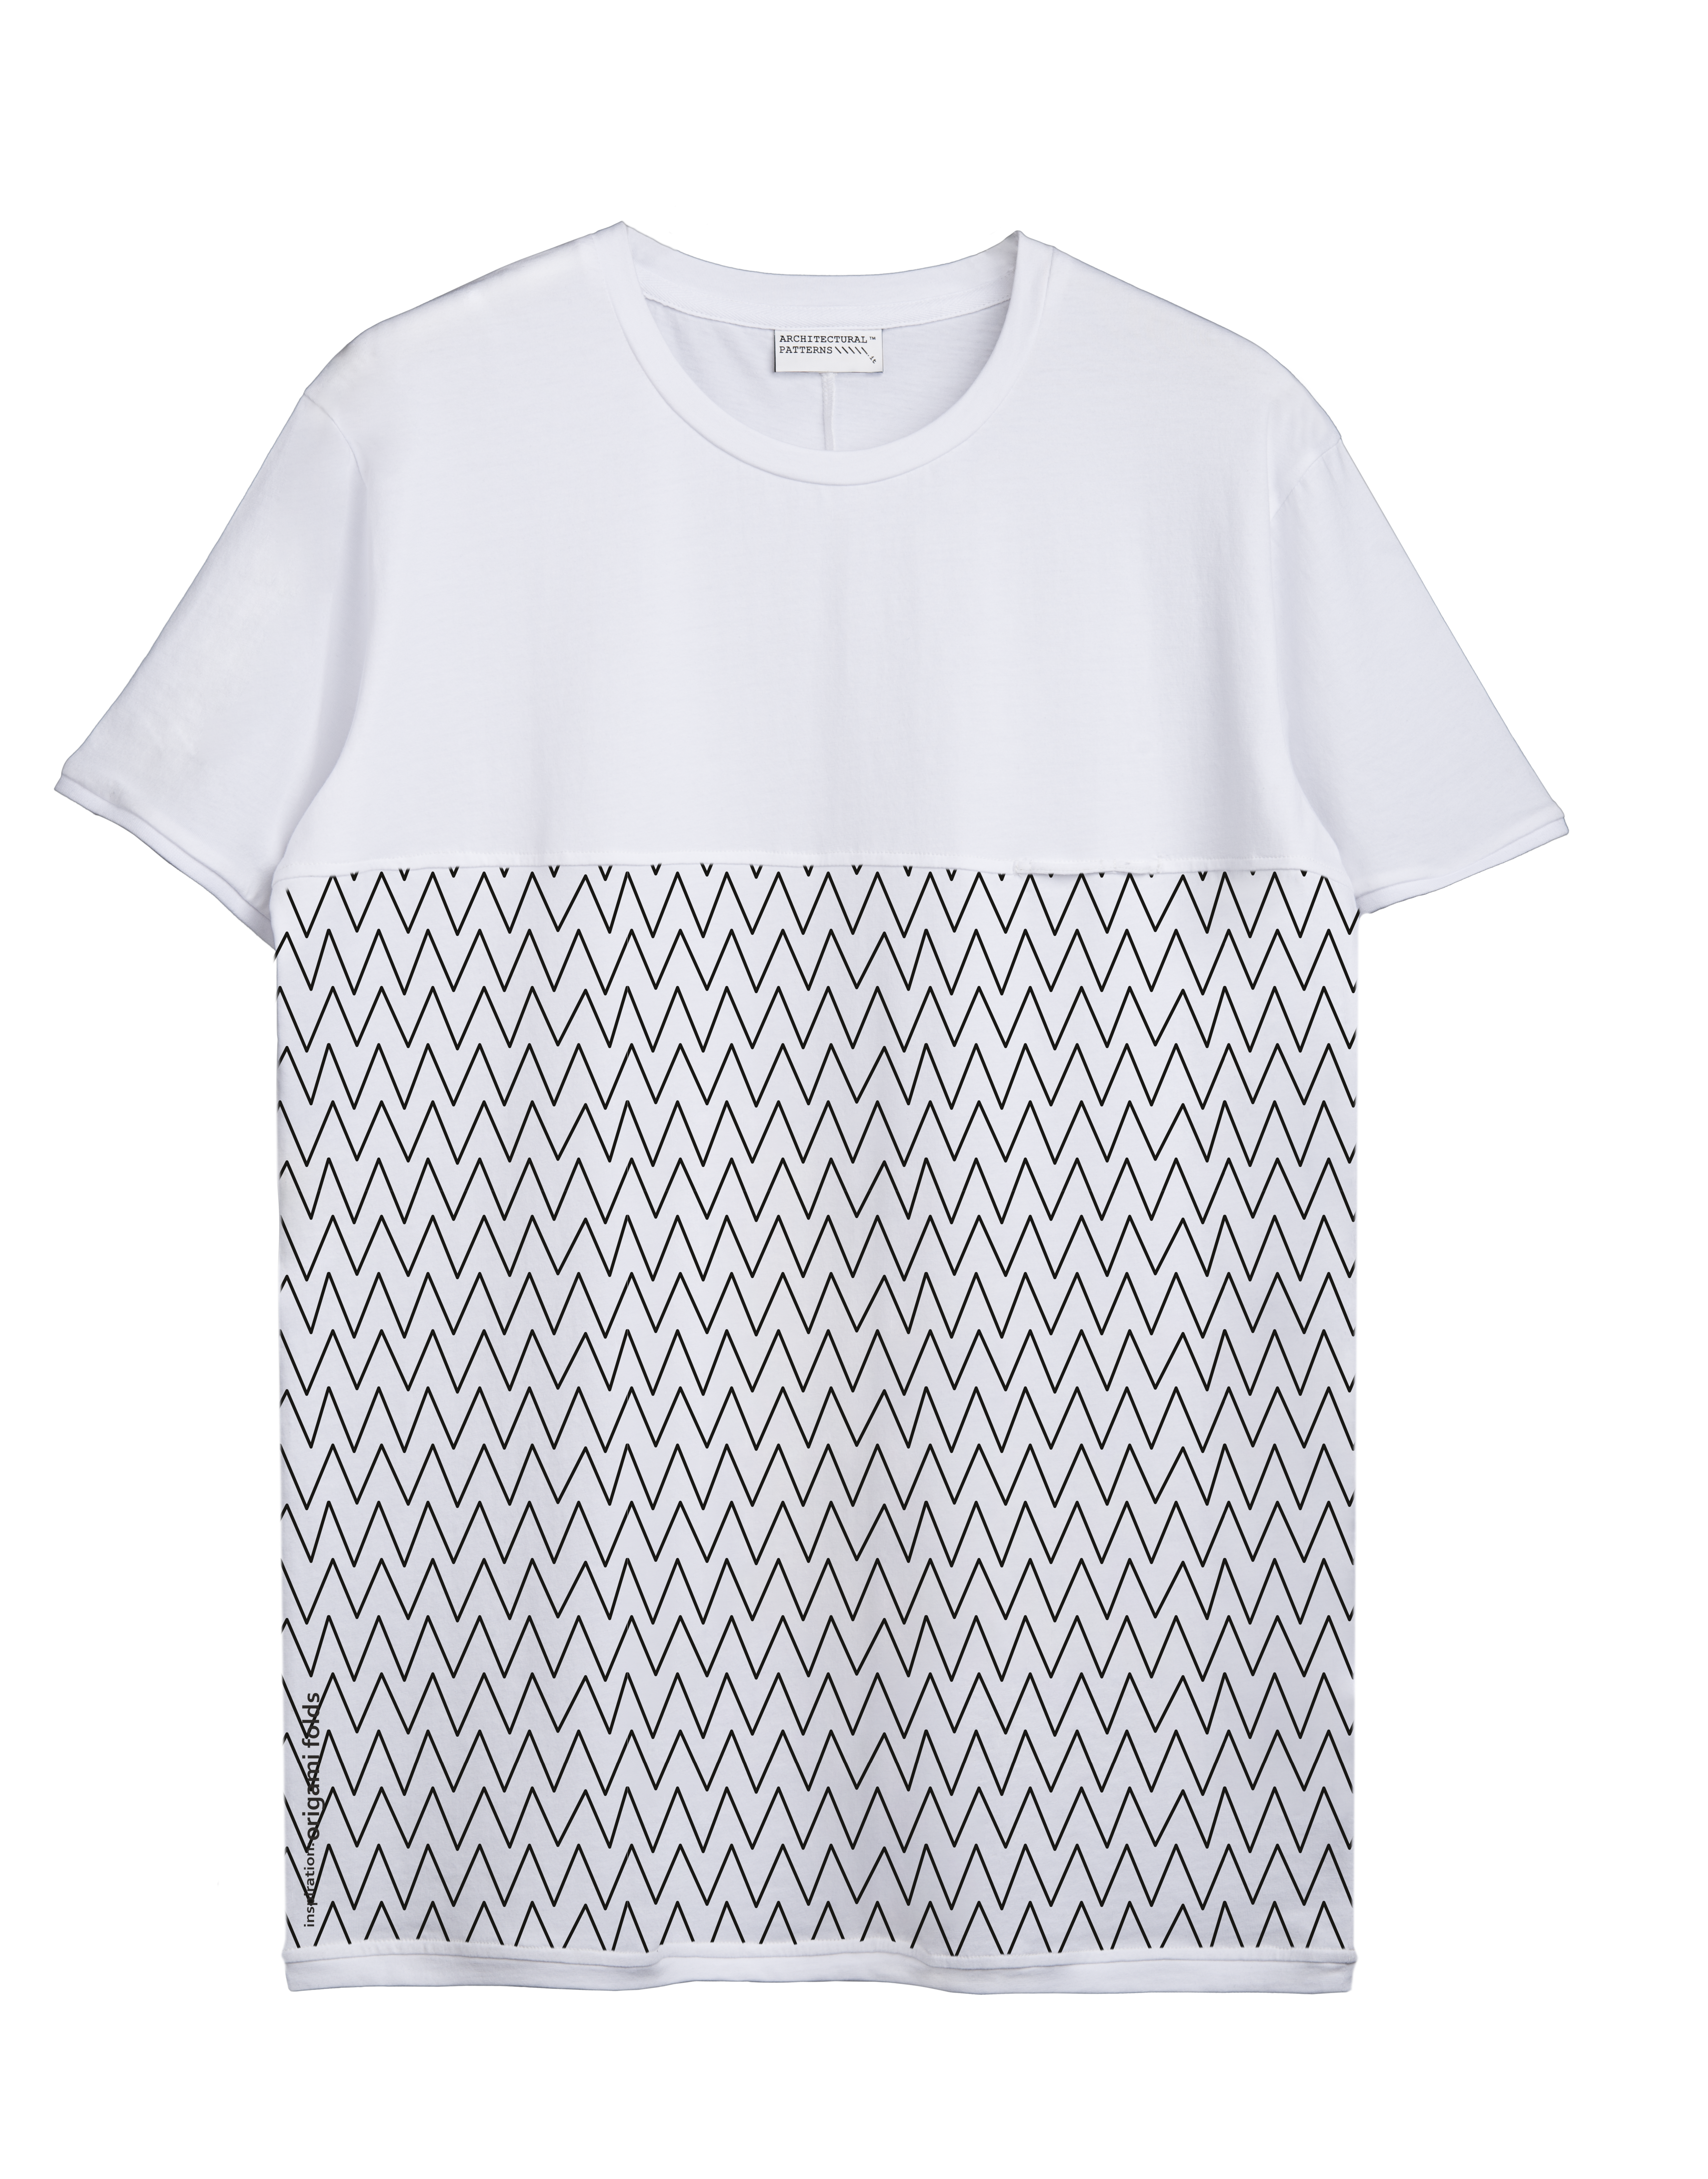 ARCHITECTURAL PATTERNS T-SHIRT “ORIGAMI FOLDS”